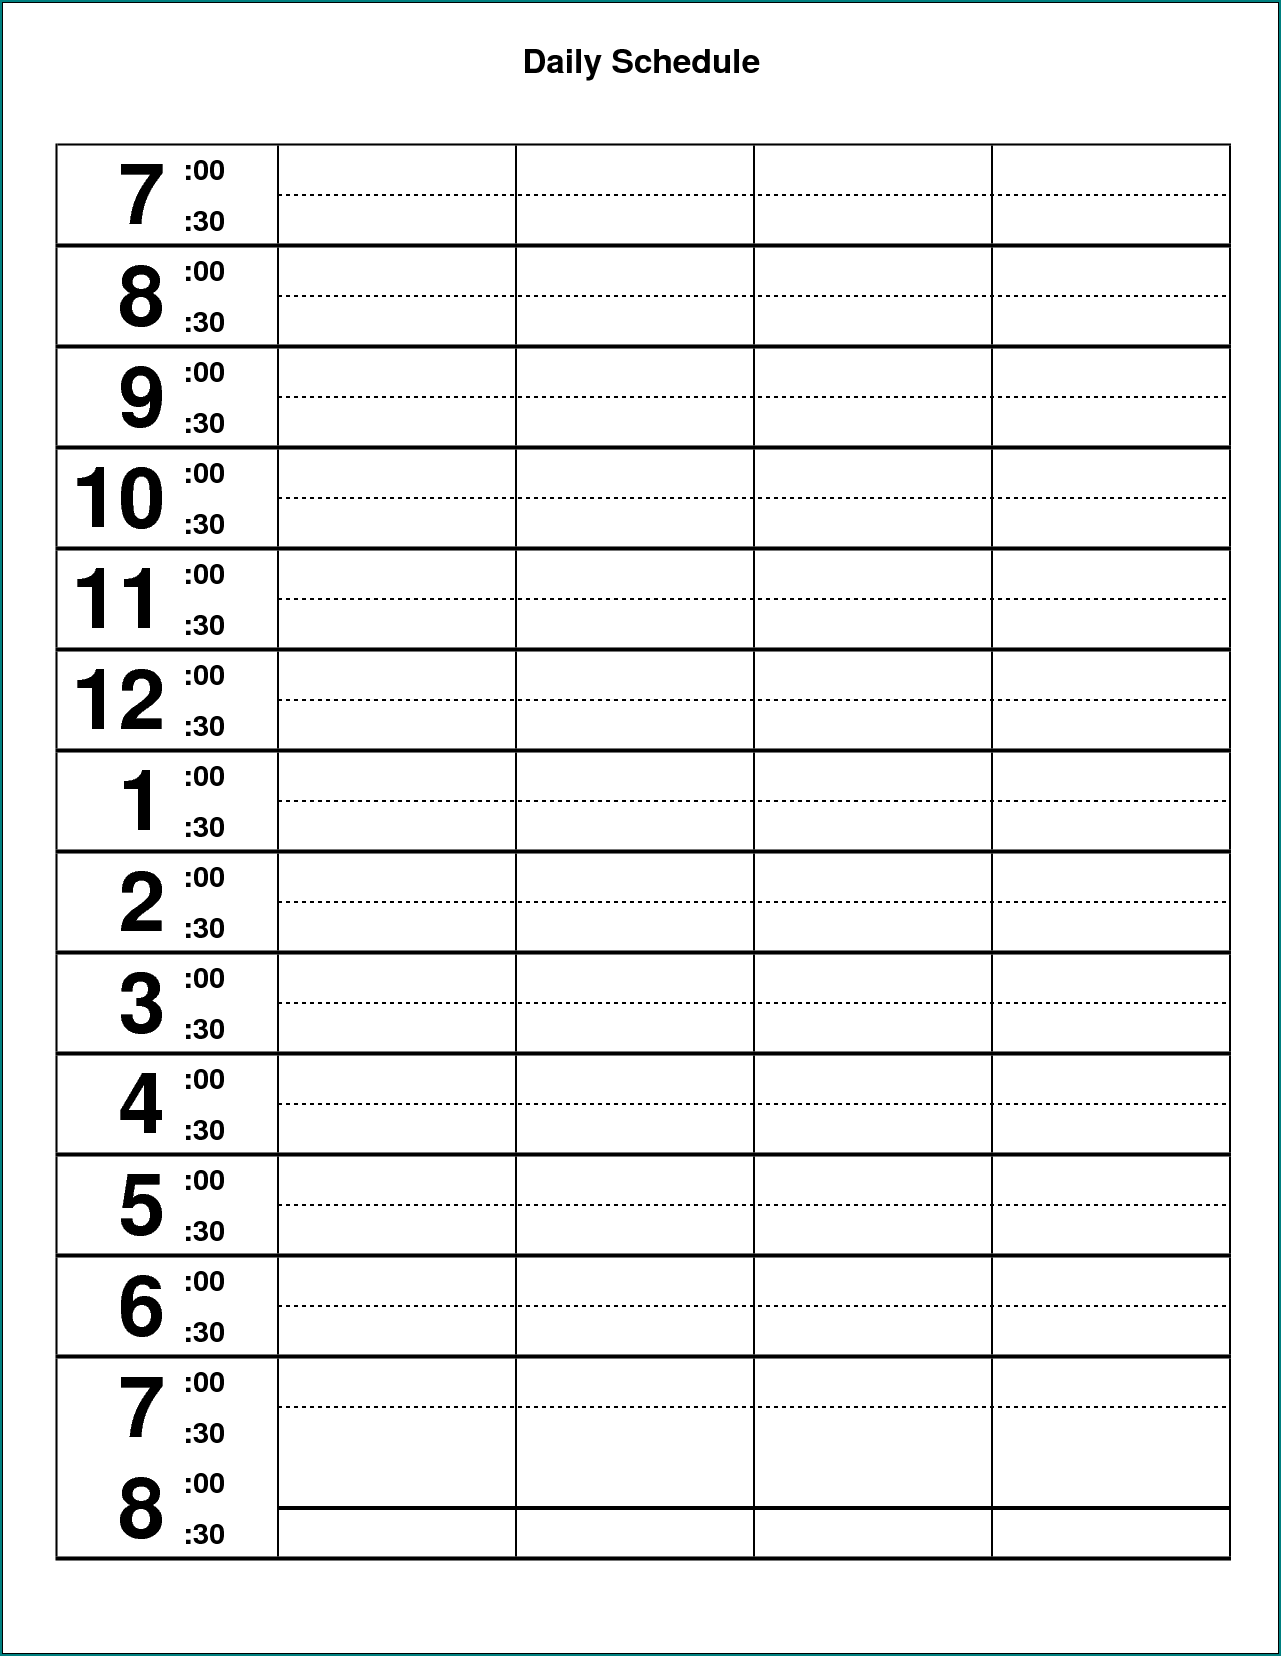 Example of Day Schedule Template